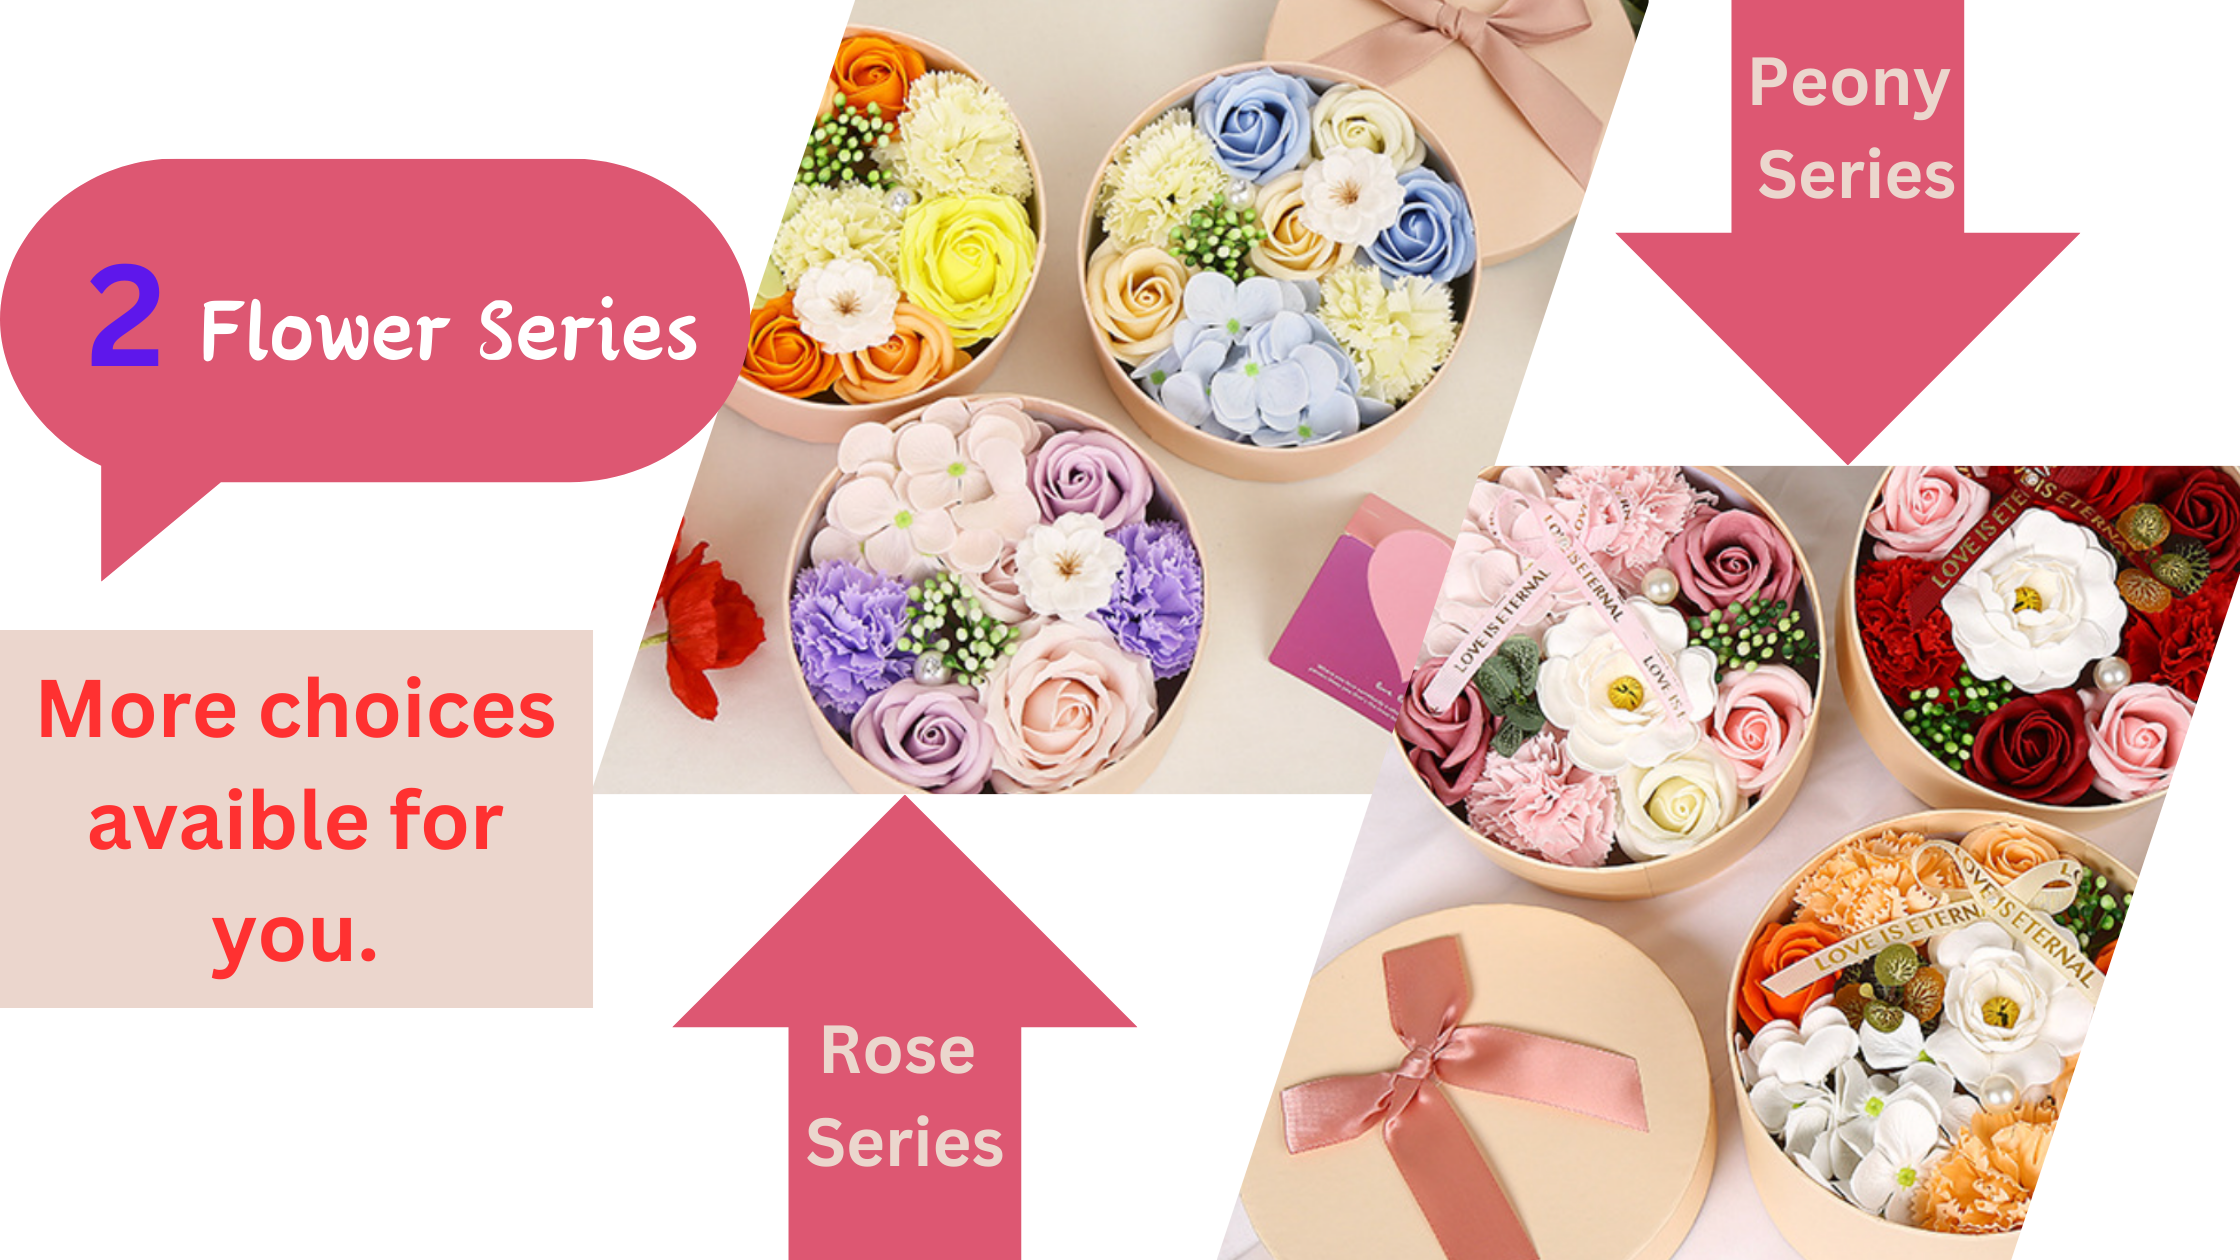 Bath Soap Rose Flower Valentine's Day Gift Floral Scented Flower Shaped Soap Rose Petals Gift Bath Decorative Soap Plant Essential Oil Soap Flowers Gift Box for Women Mom Mother's Day Christmas Gift